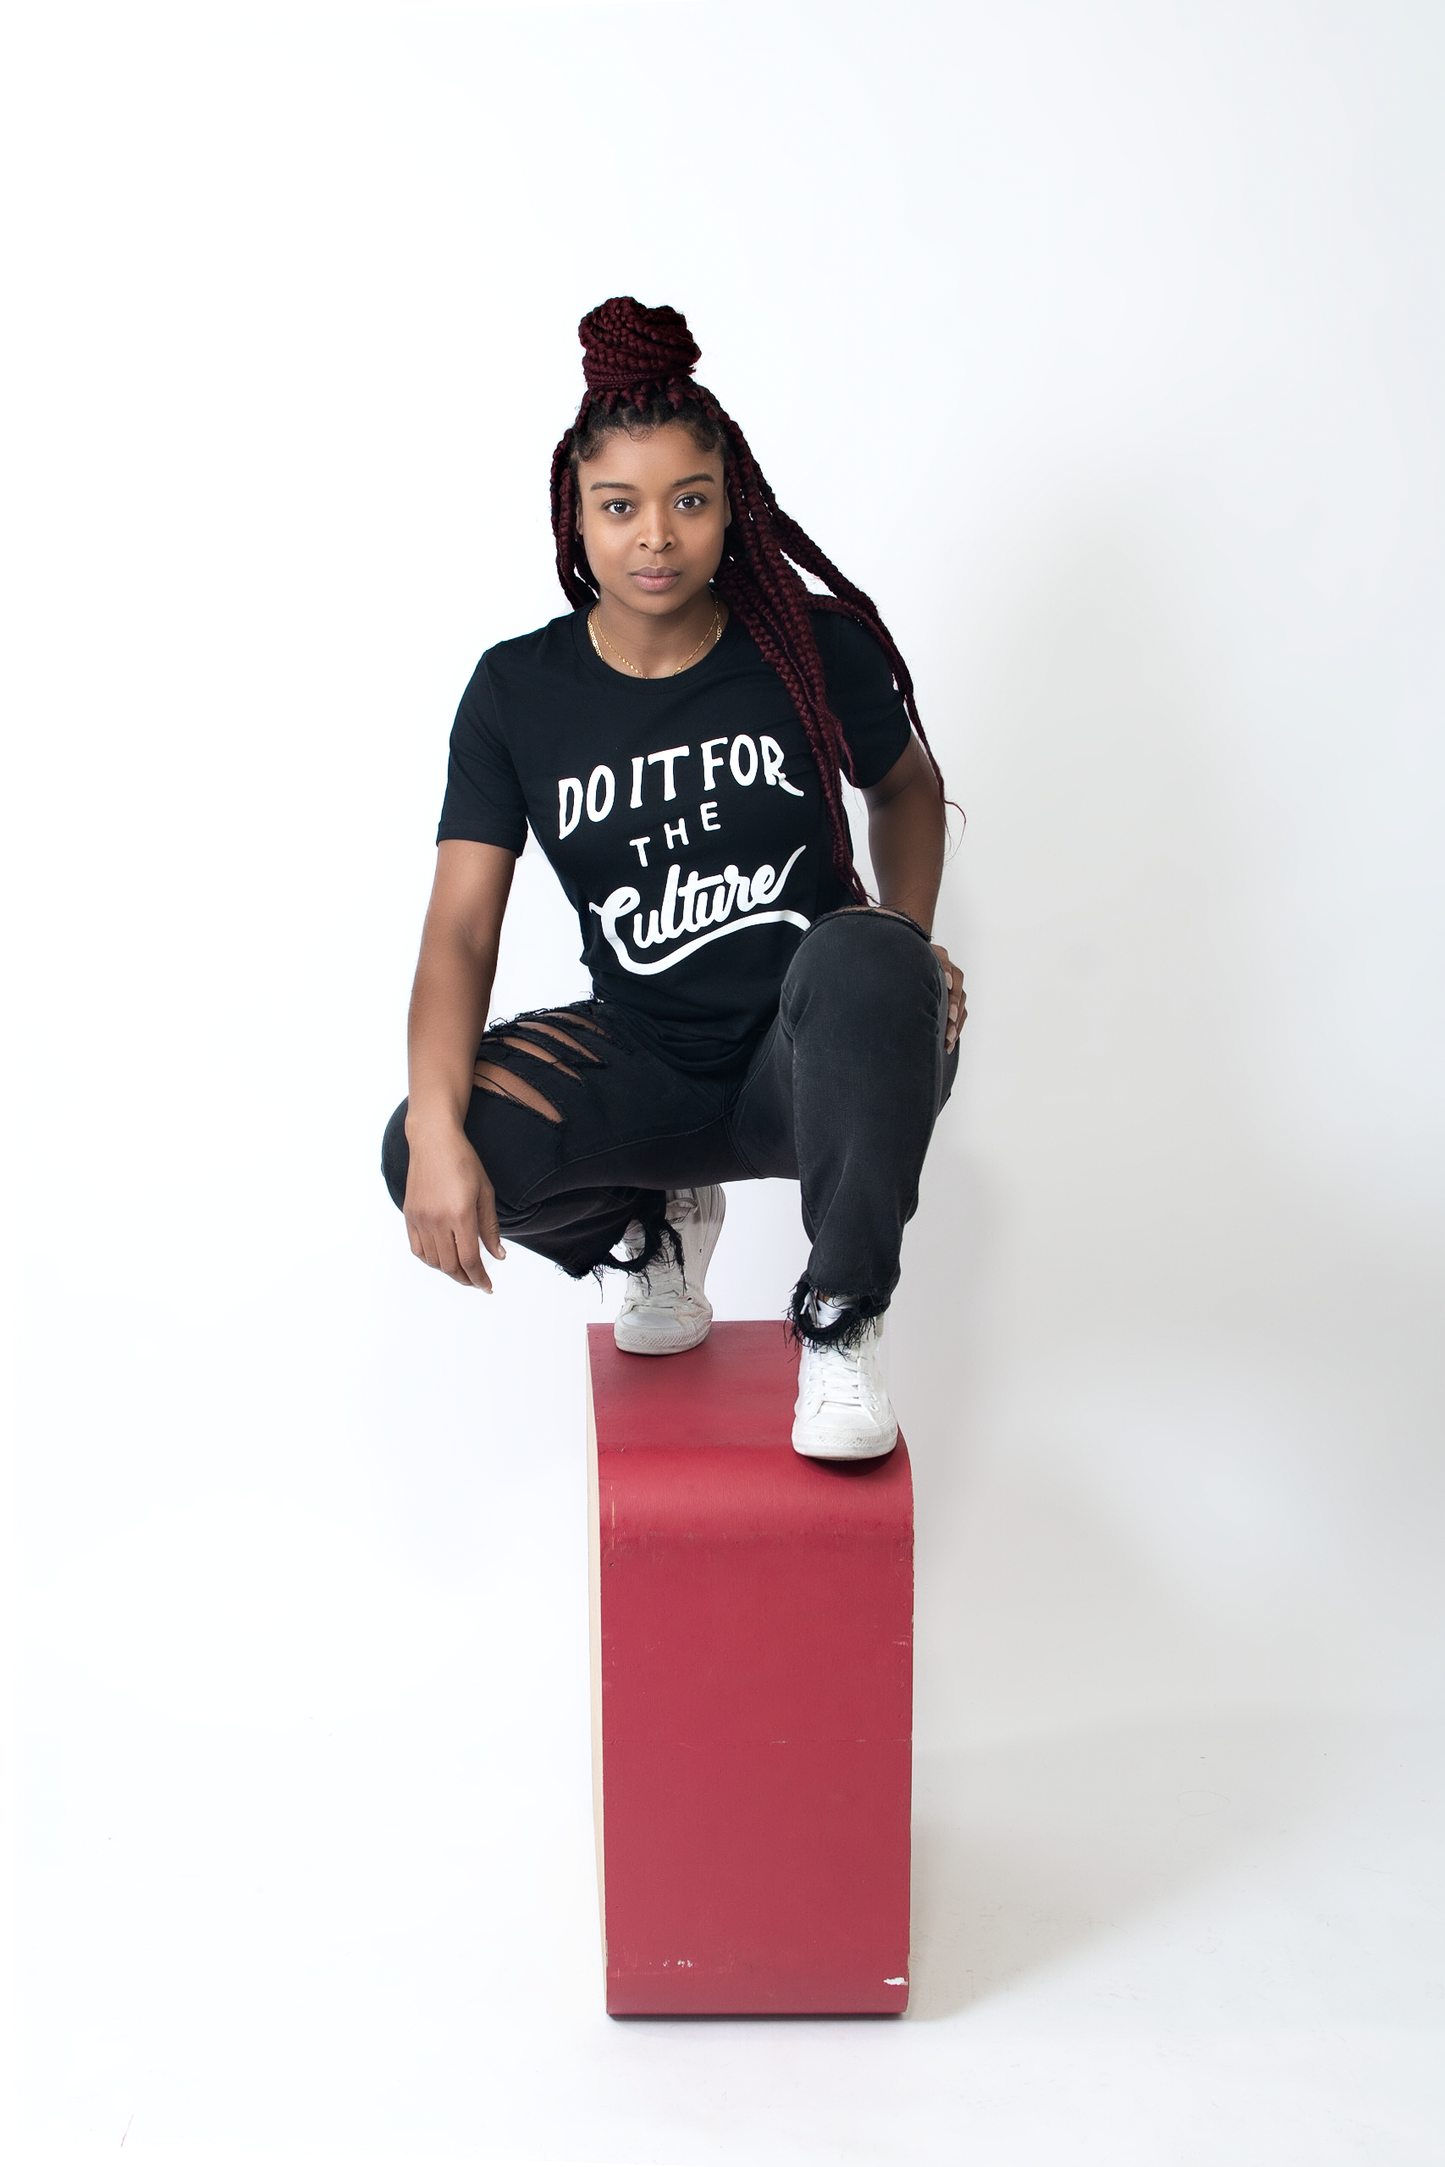 DO IT FOR THE CULTURE- BLACK- UNISEX FIT